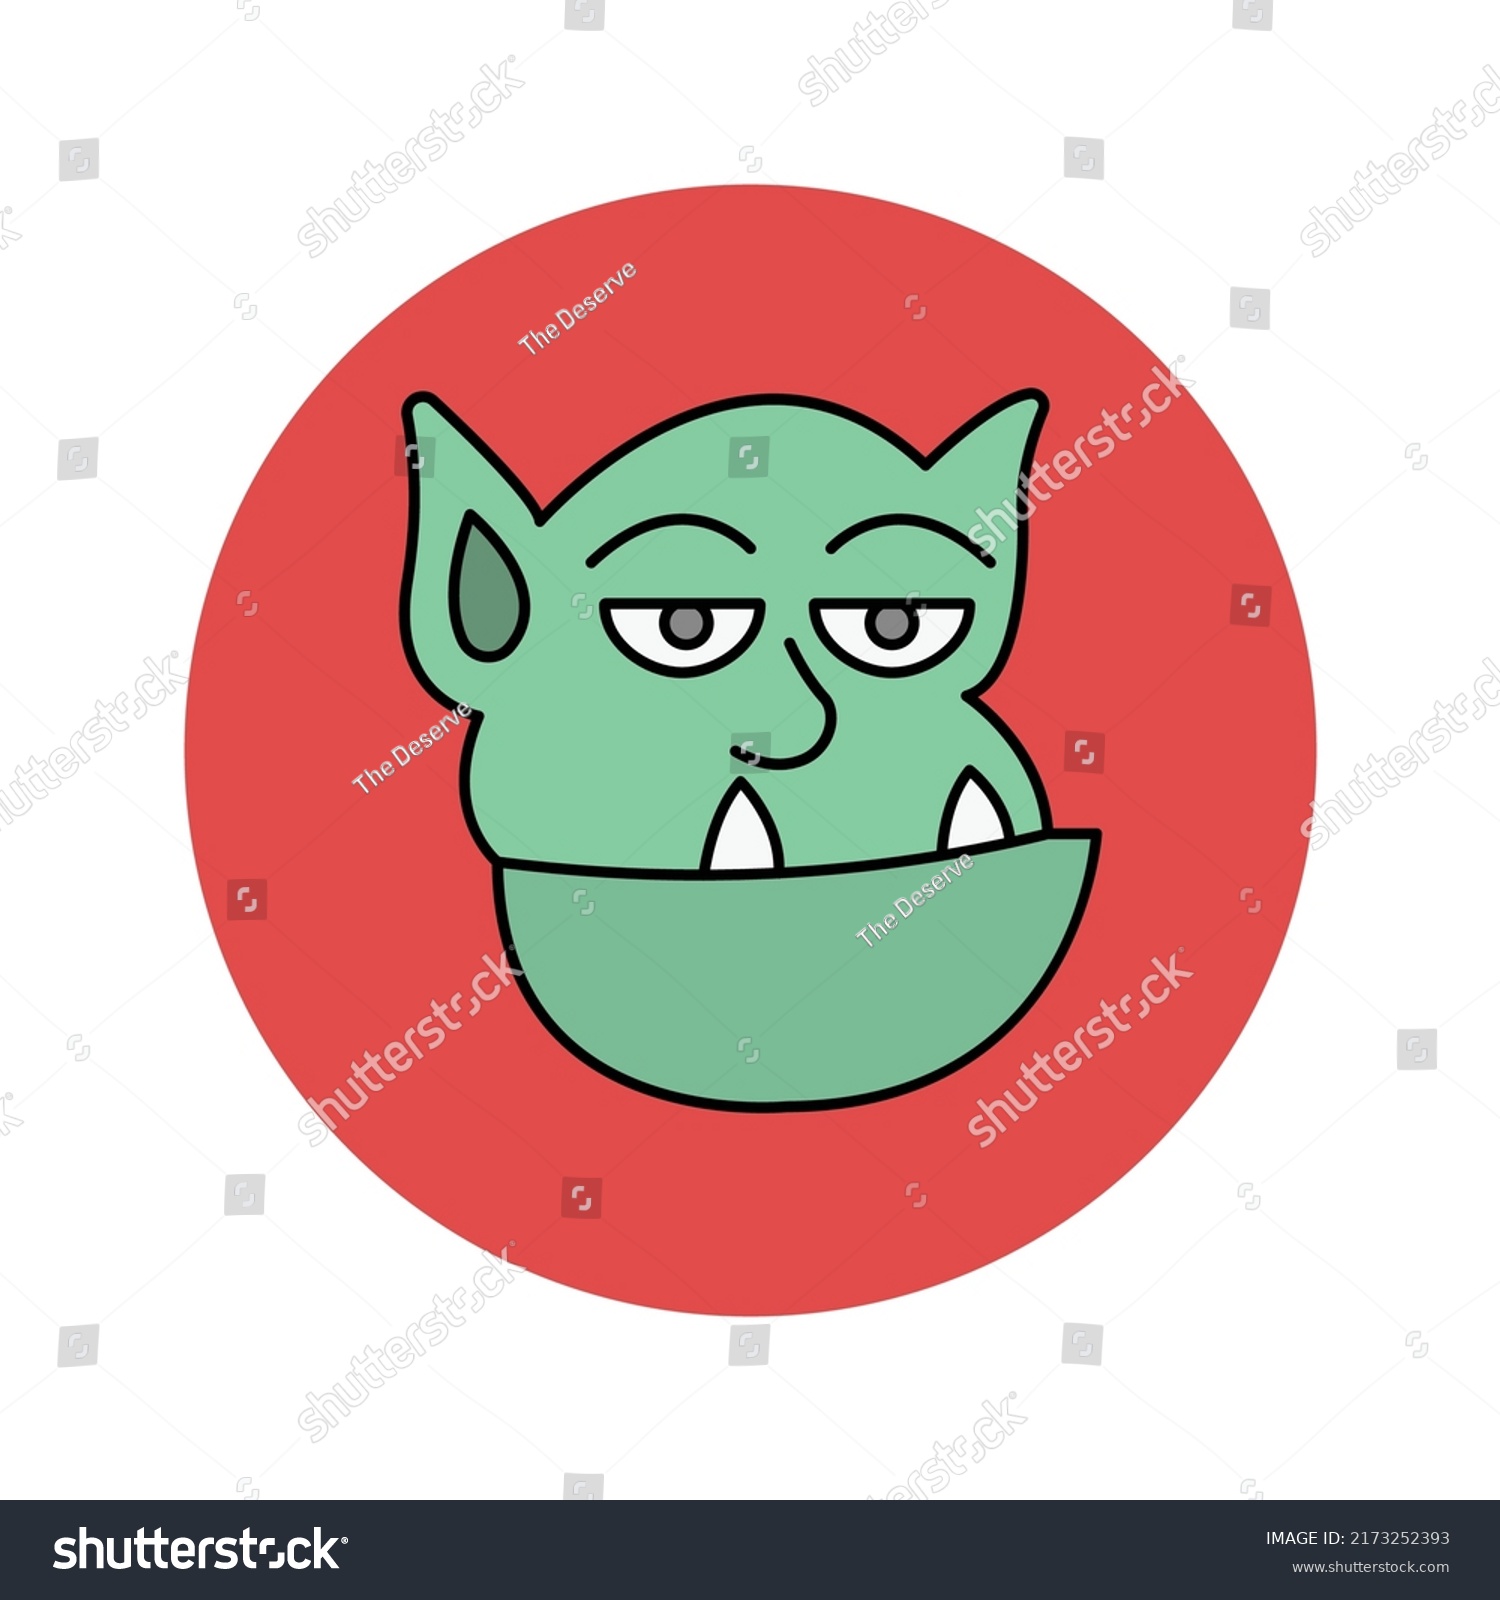 SVG of Ogre Vector icon which is suitable for commercial work and easily modify or edit it

 svg